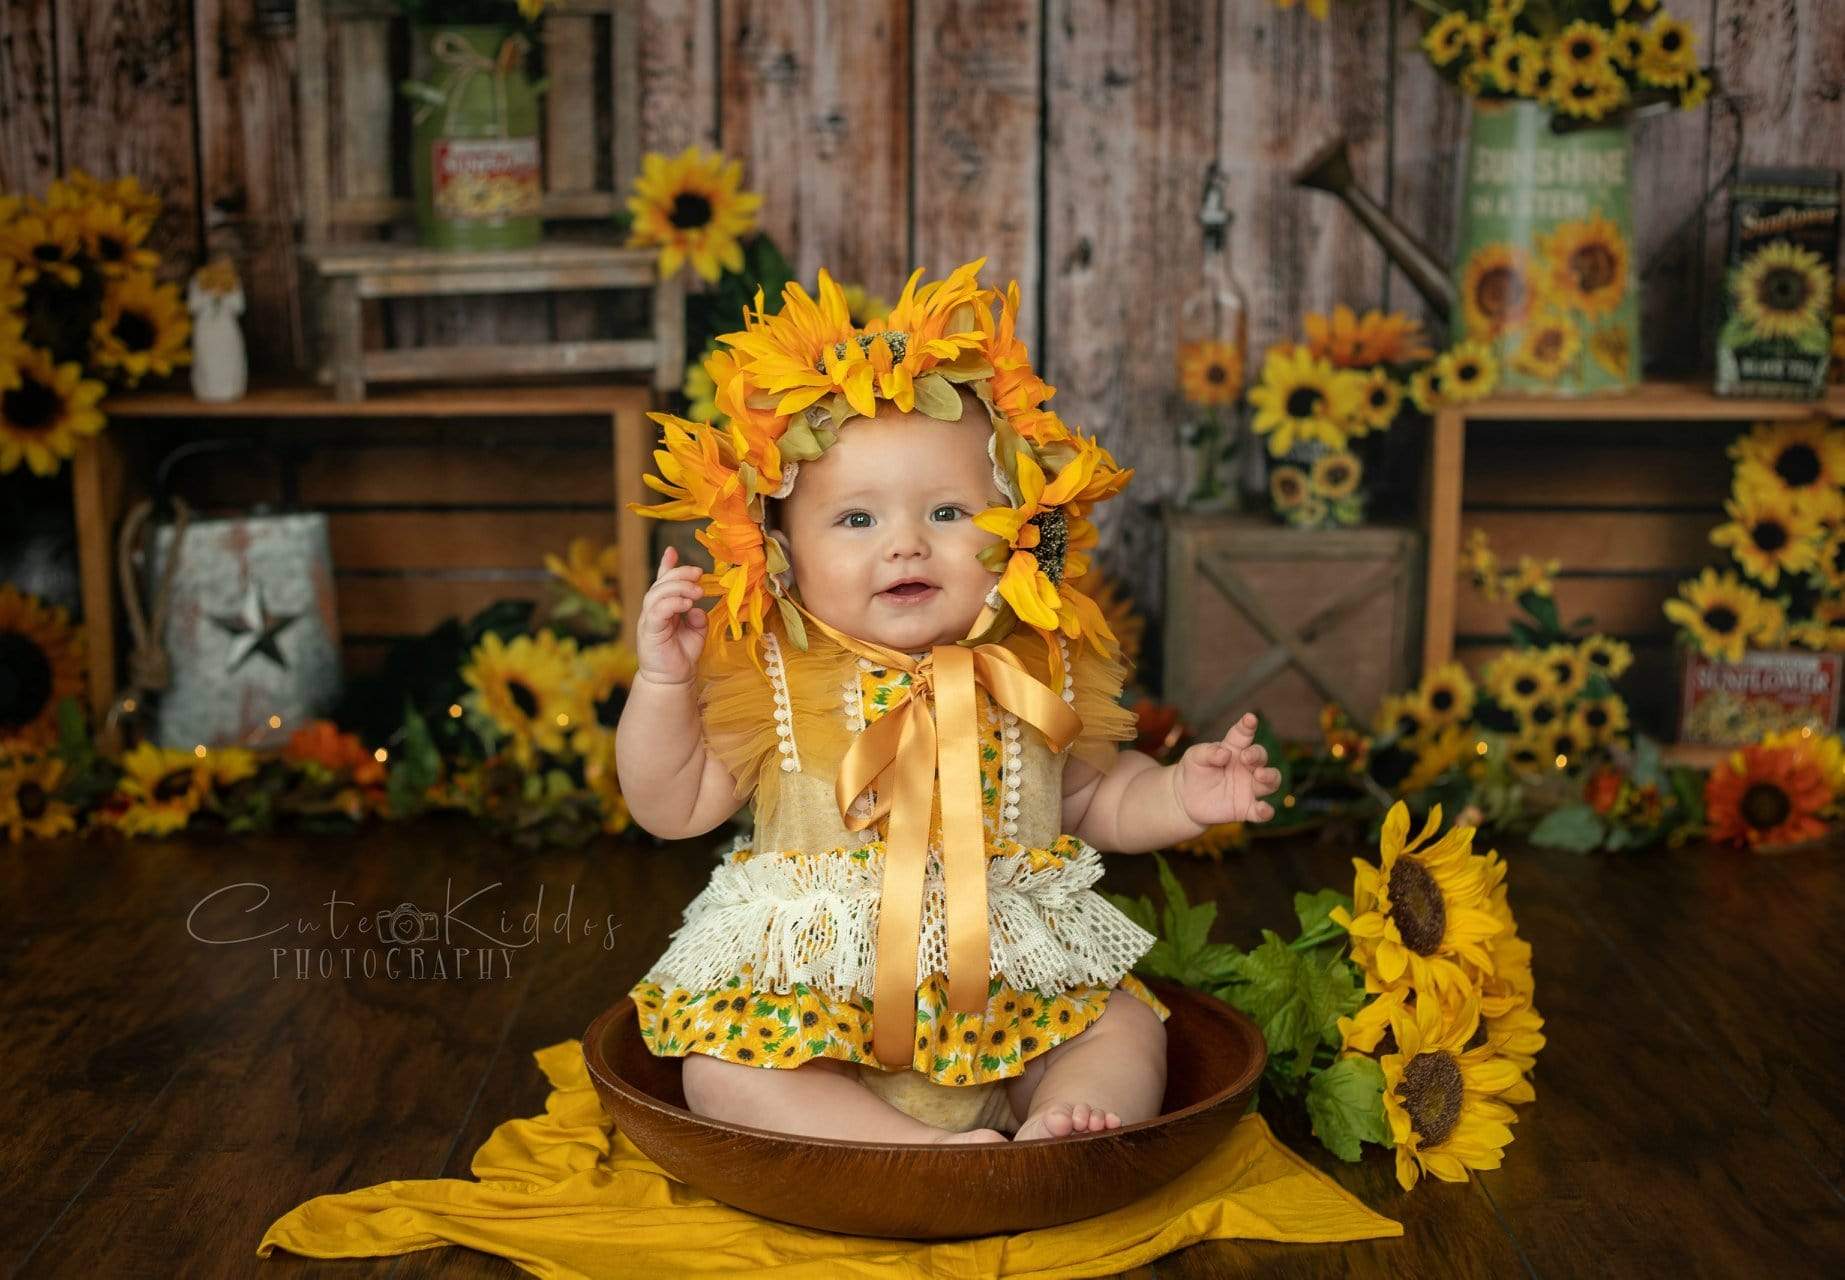 Kate Summer Sunflower Gift Shop Wood Autumn Backdrop for Photography